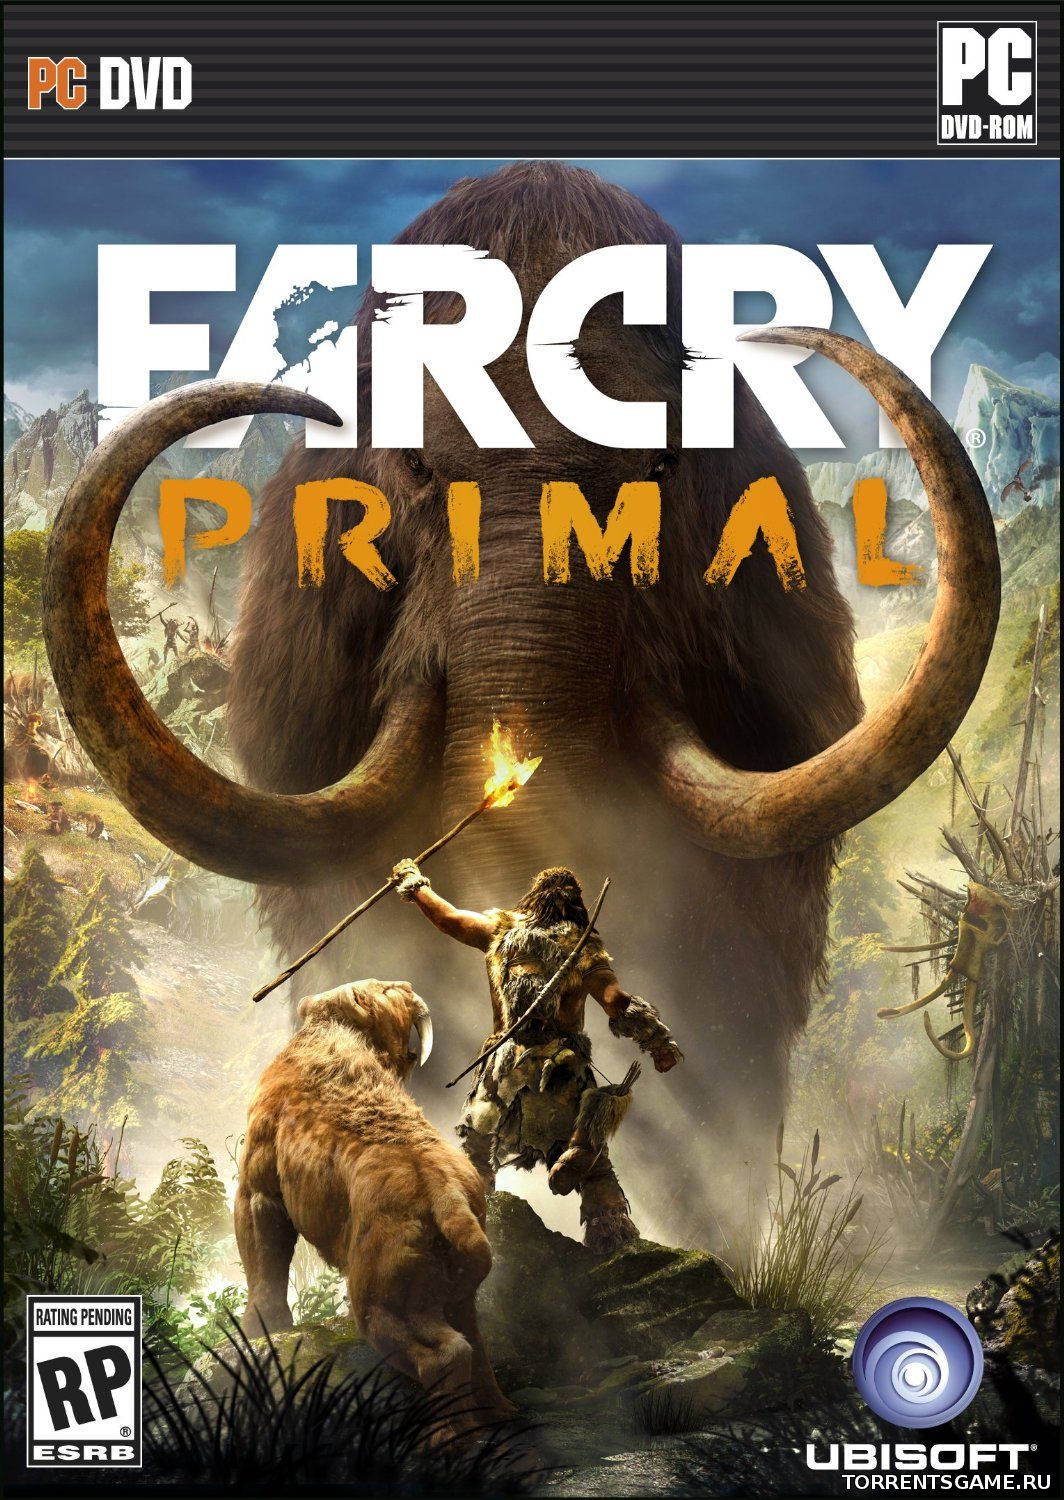 http://torrentsgame.ru/load/games/action/far_cry_primal/2-1-0-60